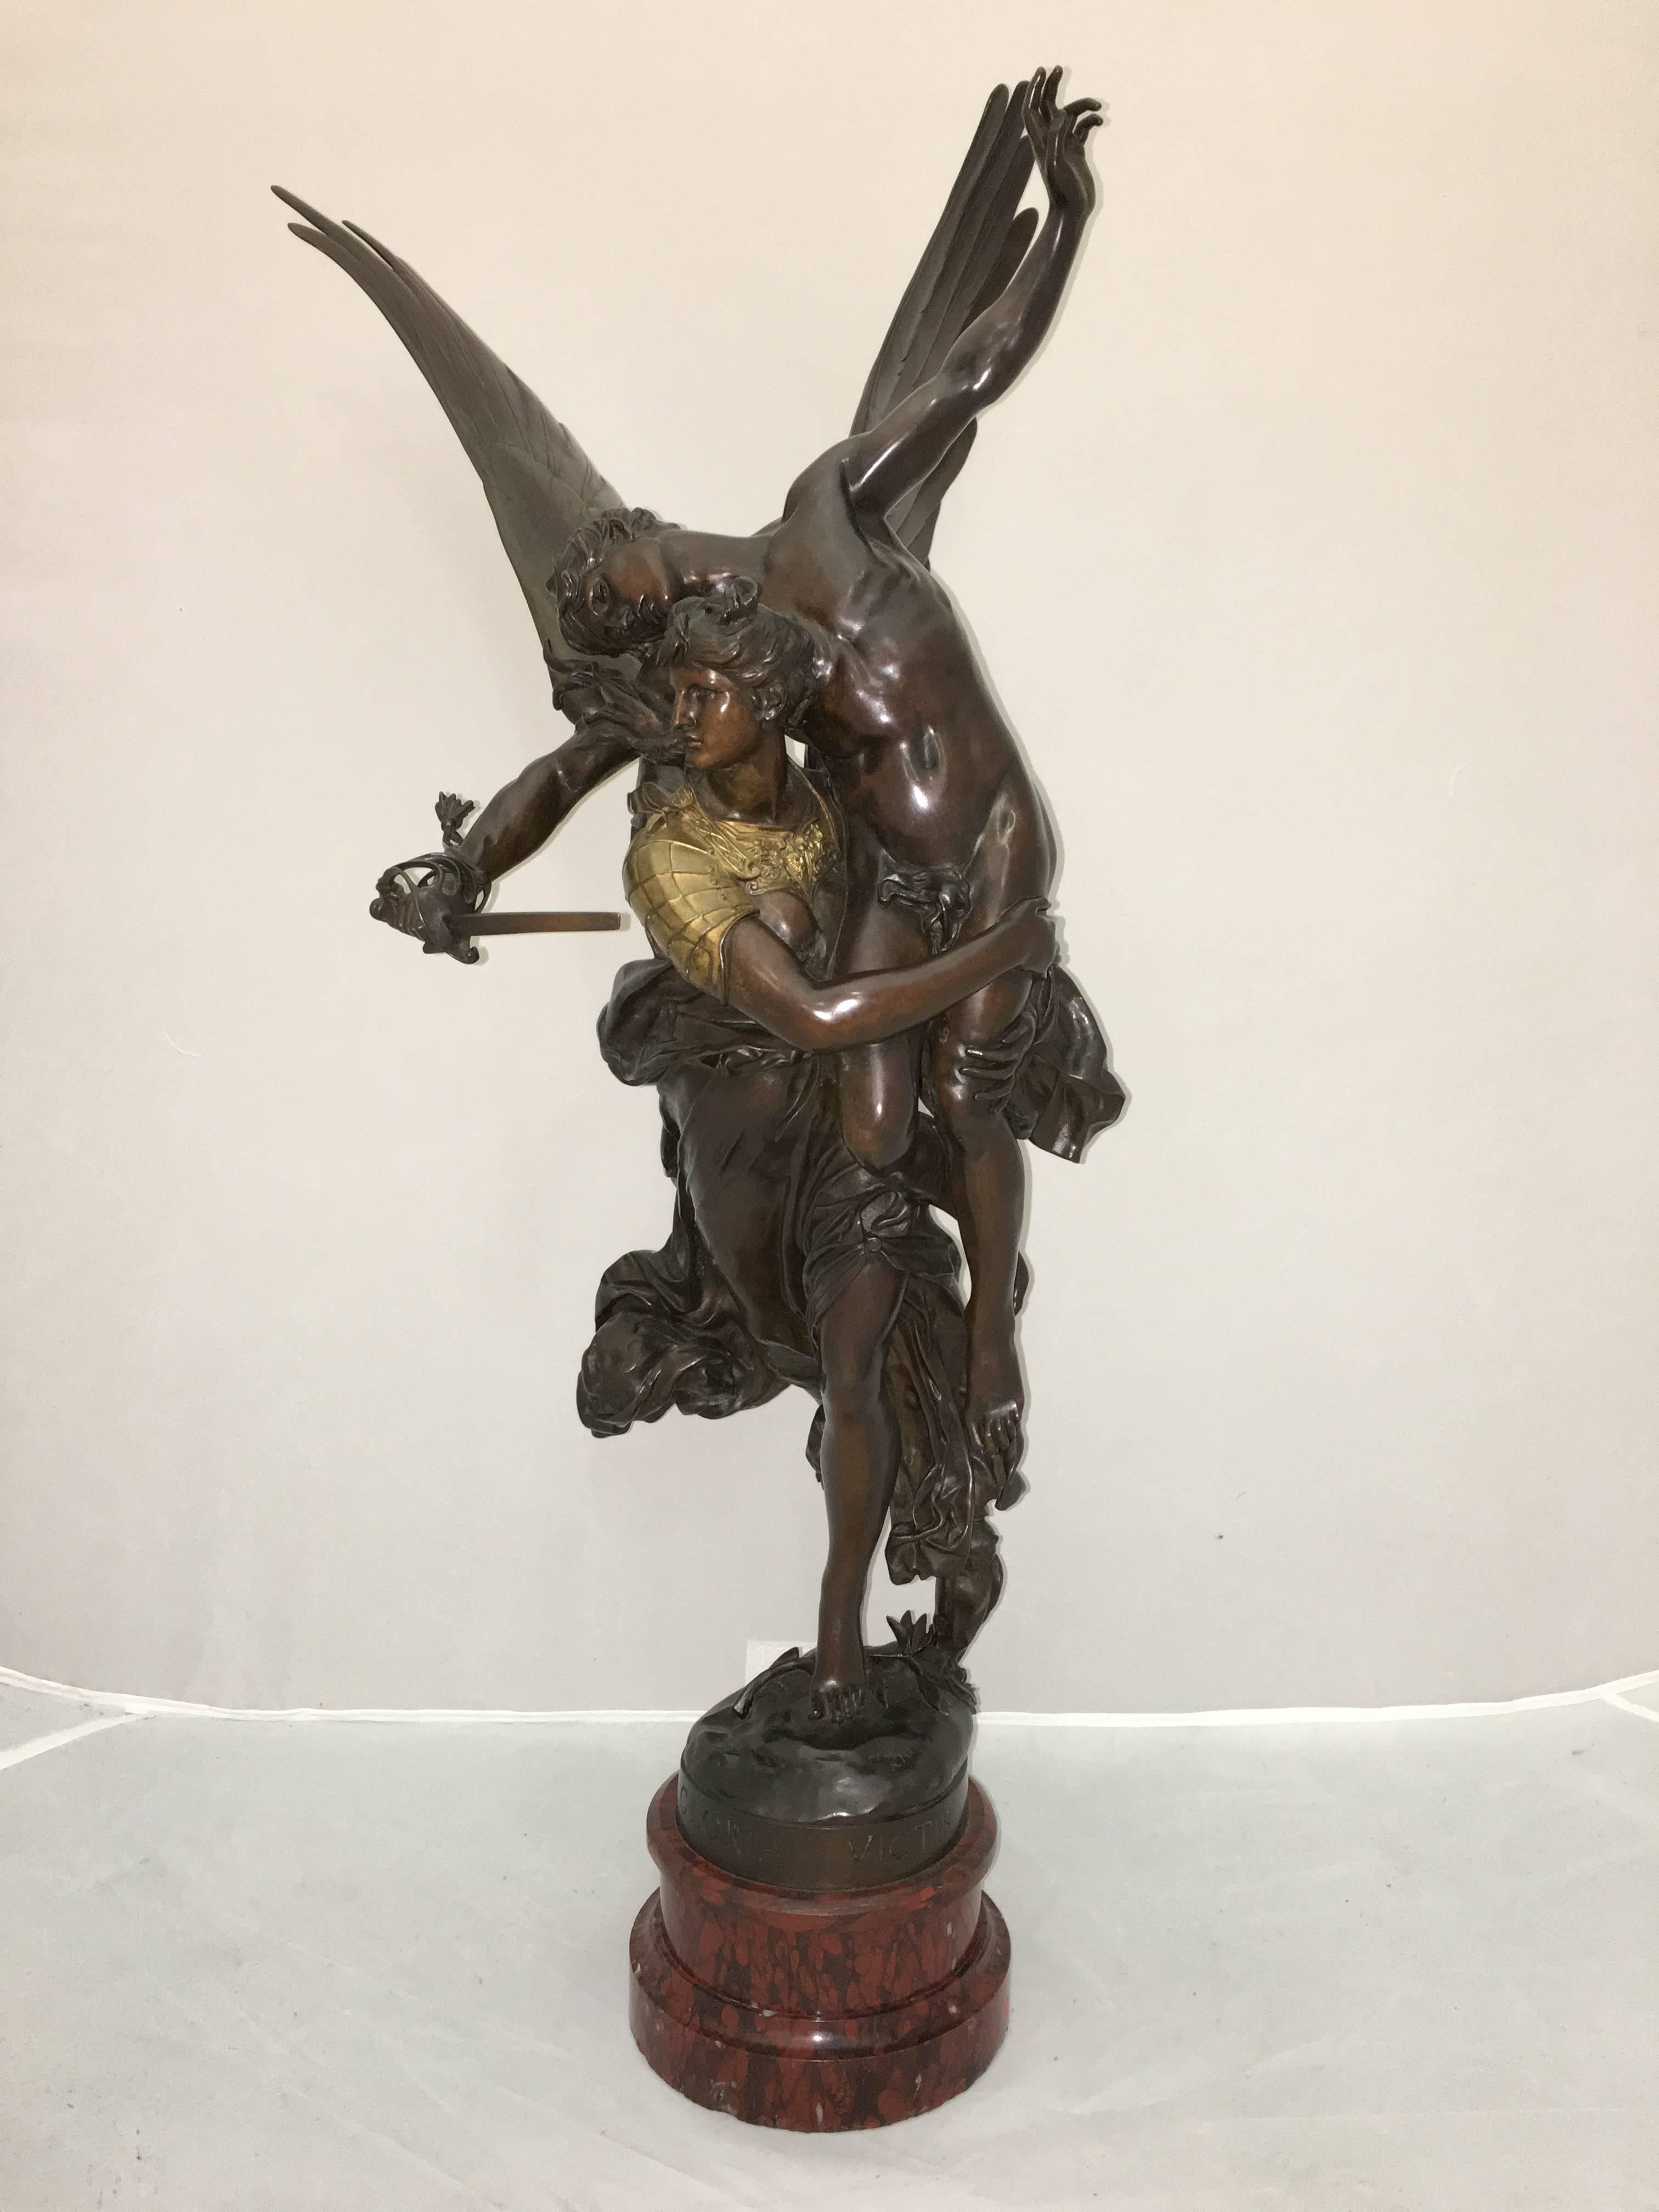 A fine quality French 19th century bronze statue depicting 'Gloria Victis' signed;
A. Mercie. Barbedienne. Having gilded relief and mounted on a rouge marble plinth.